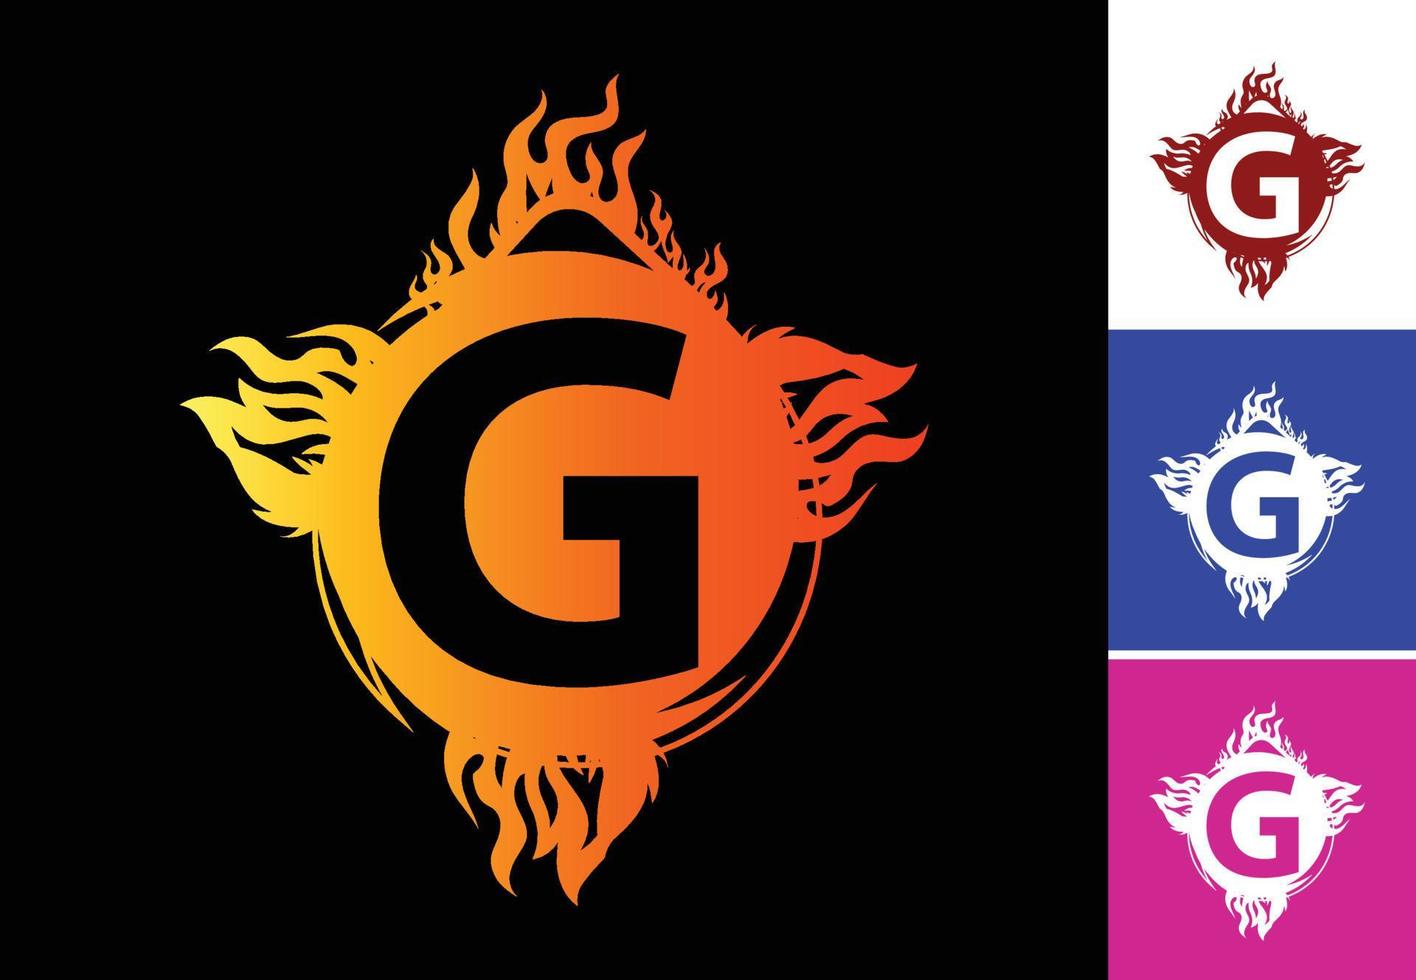 Fire G letter logo and icon design template vector